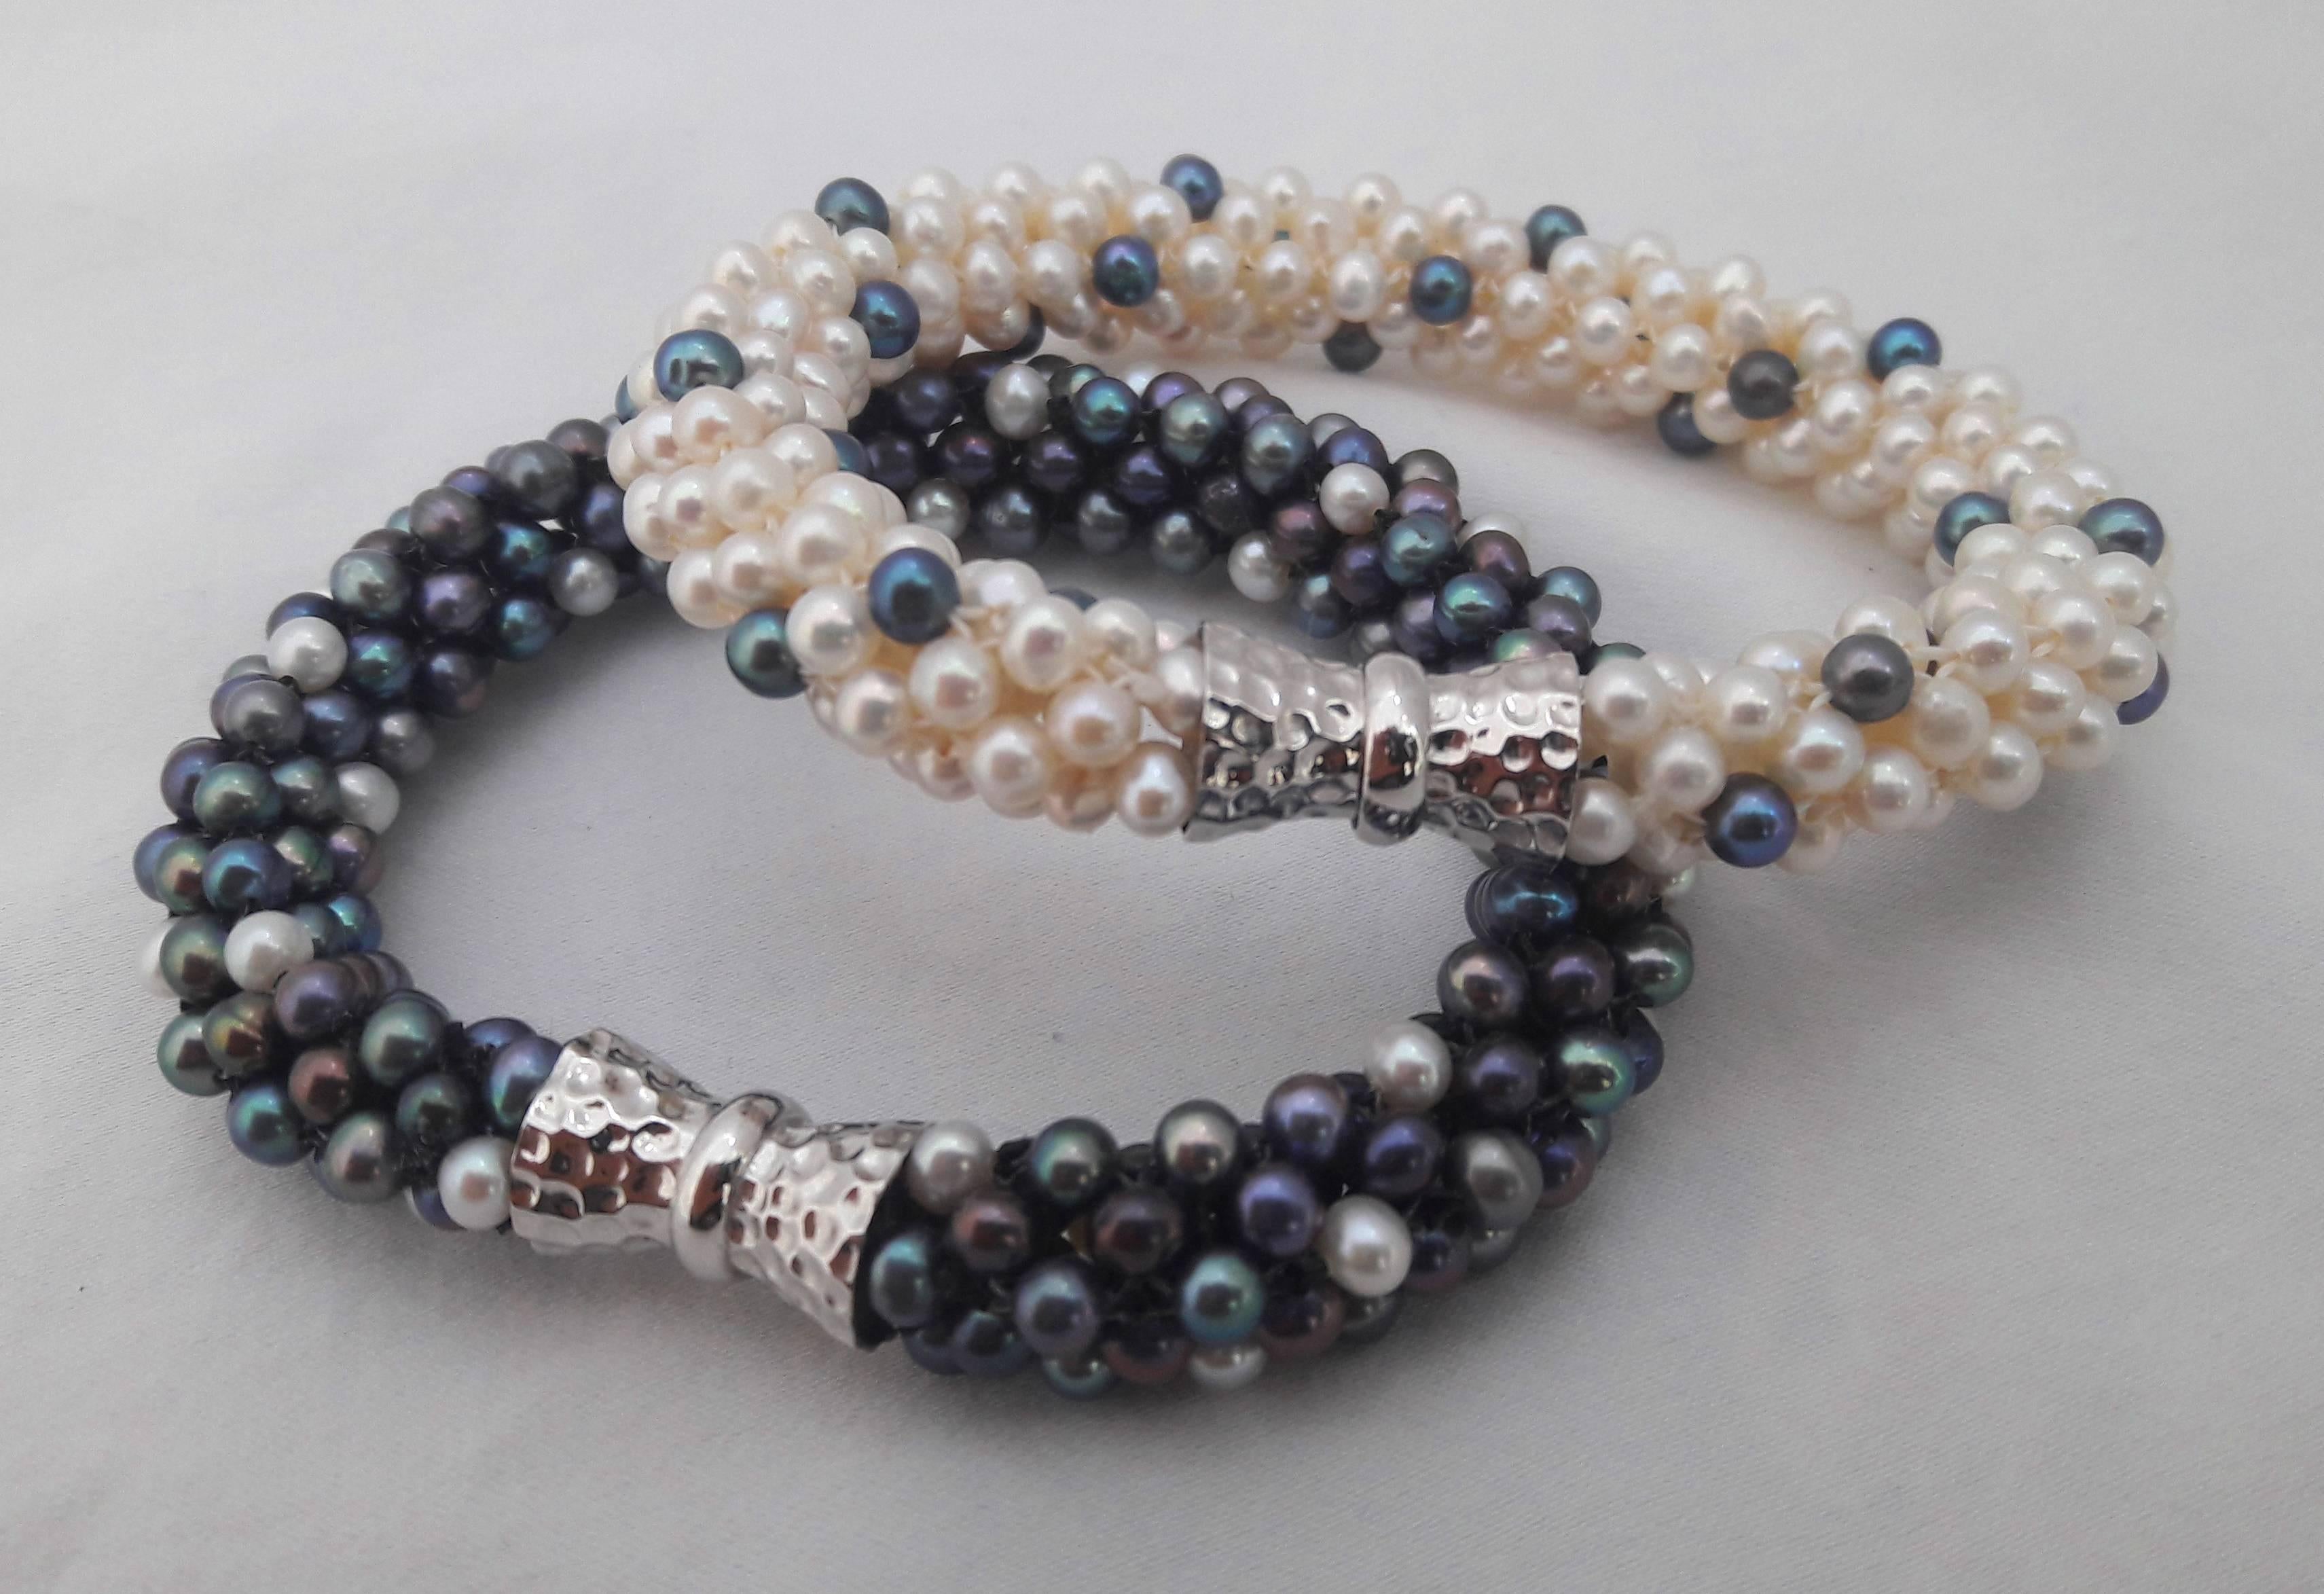 White pearl and black pearl are woven together to create a rope style necklace. Beads measure 3.5mm each and woven into a thick tubular rope of approximately 1/3 of an inch. This unique, modern and one of a kind necklace can be worn day or night.